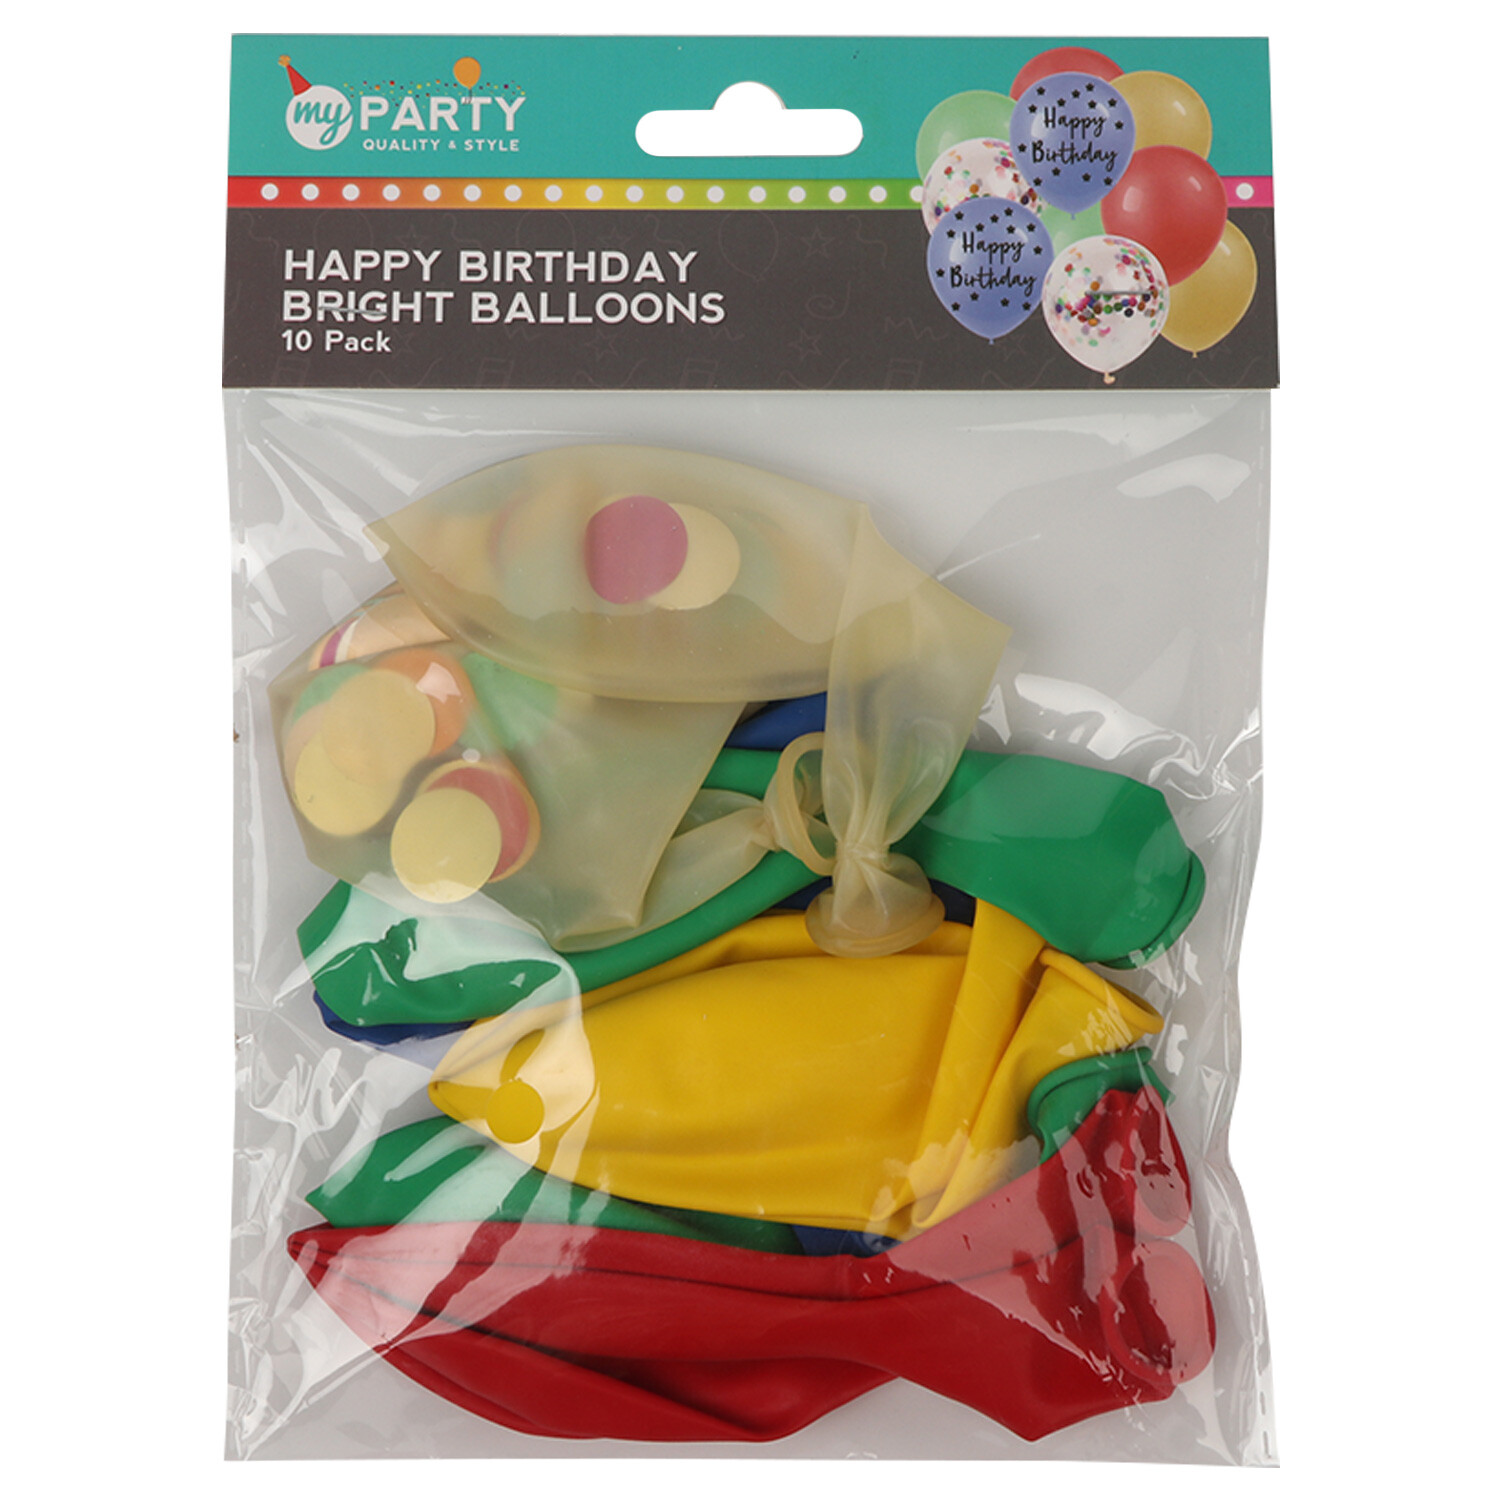 Pack of 10 Happy Birthday Bright Balloons Image